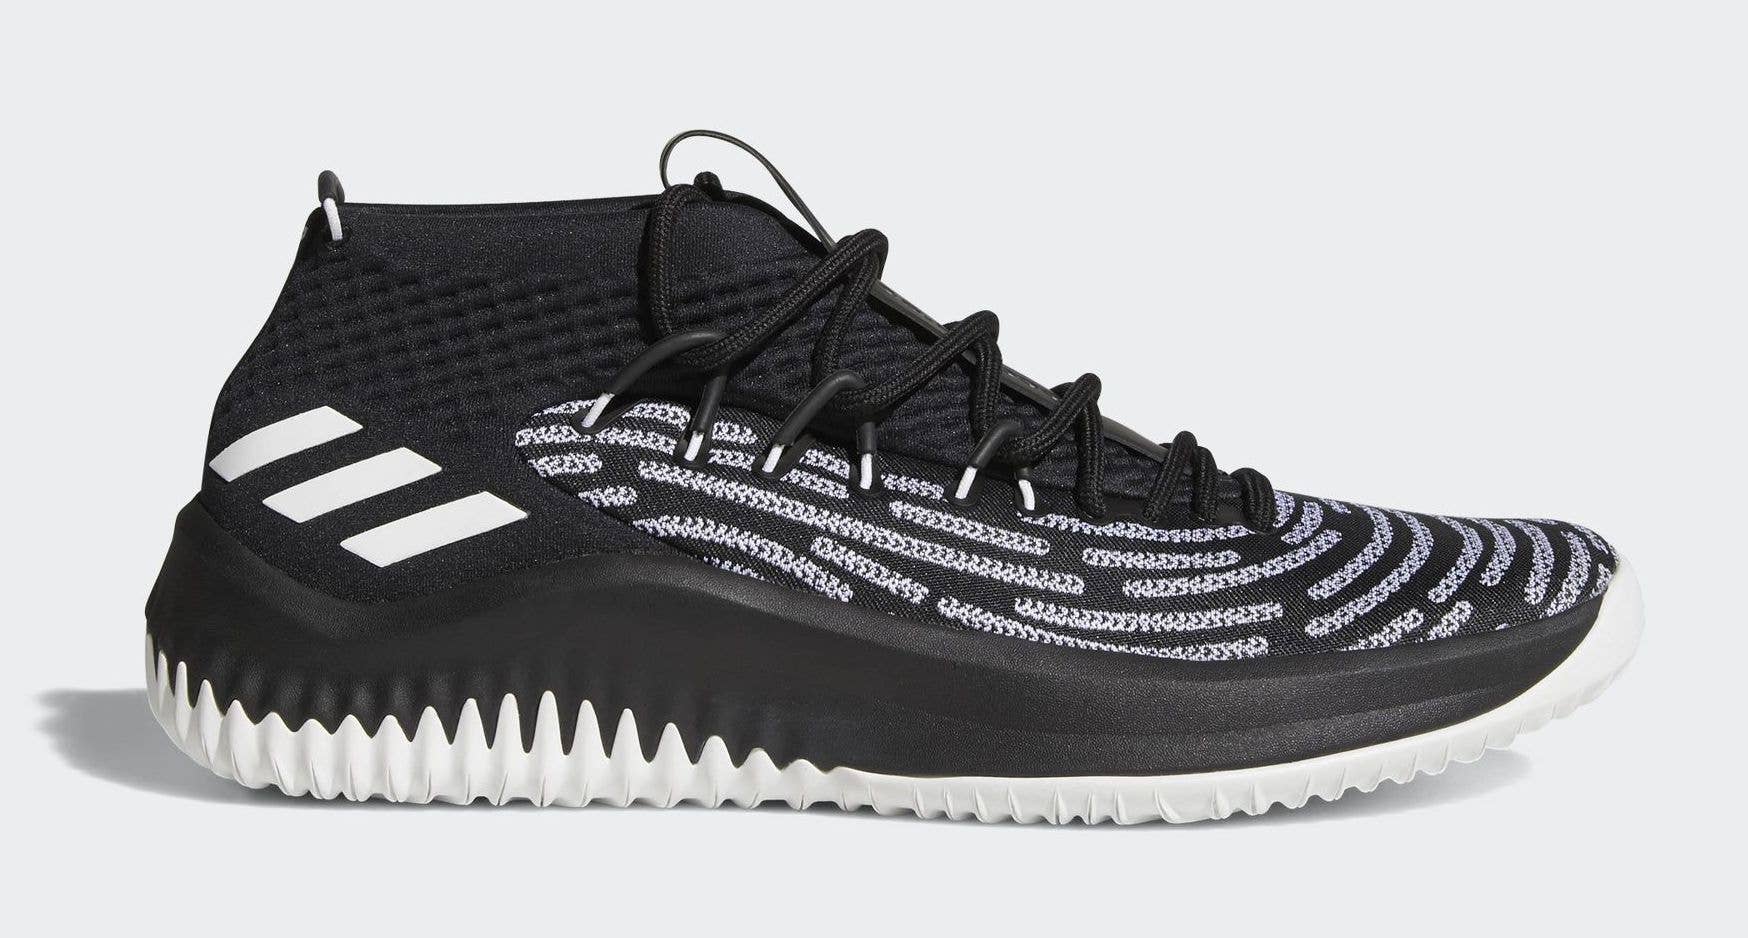 Adidas Dame 4 'Black History Month' AQ0380 (Lateral)